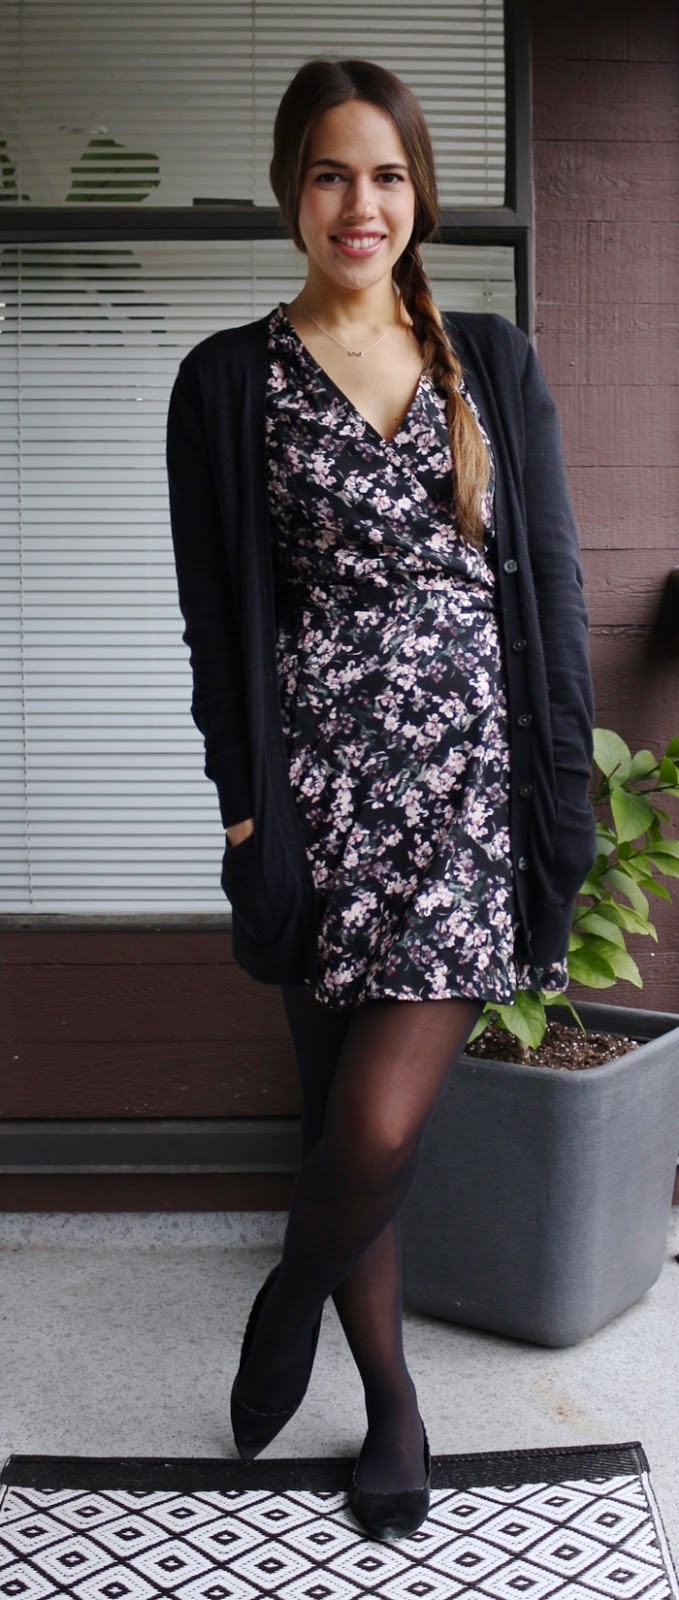 Jules in Flats - Floral Wrap Dress with Cardigan for Work